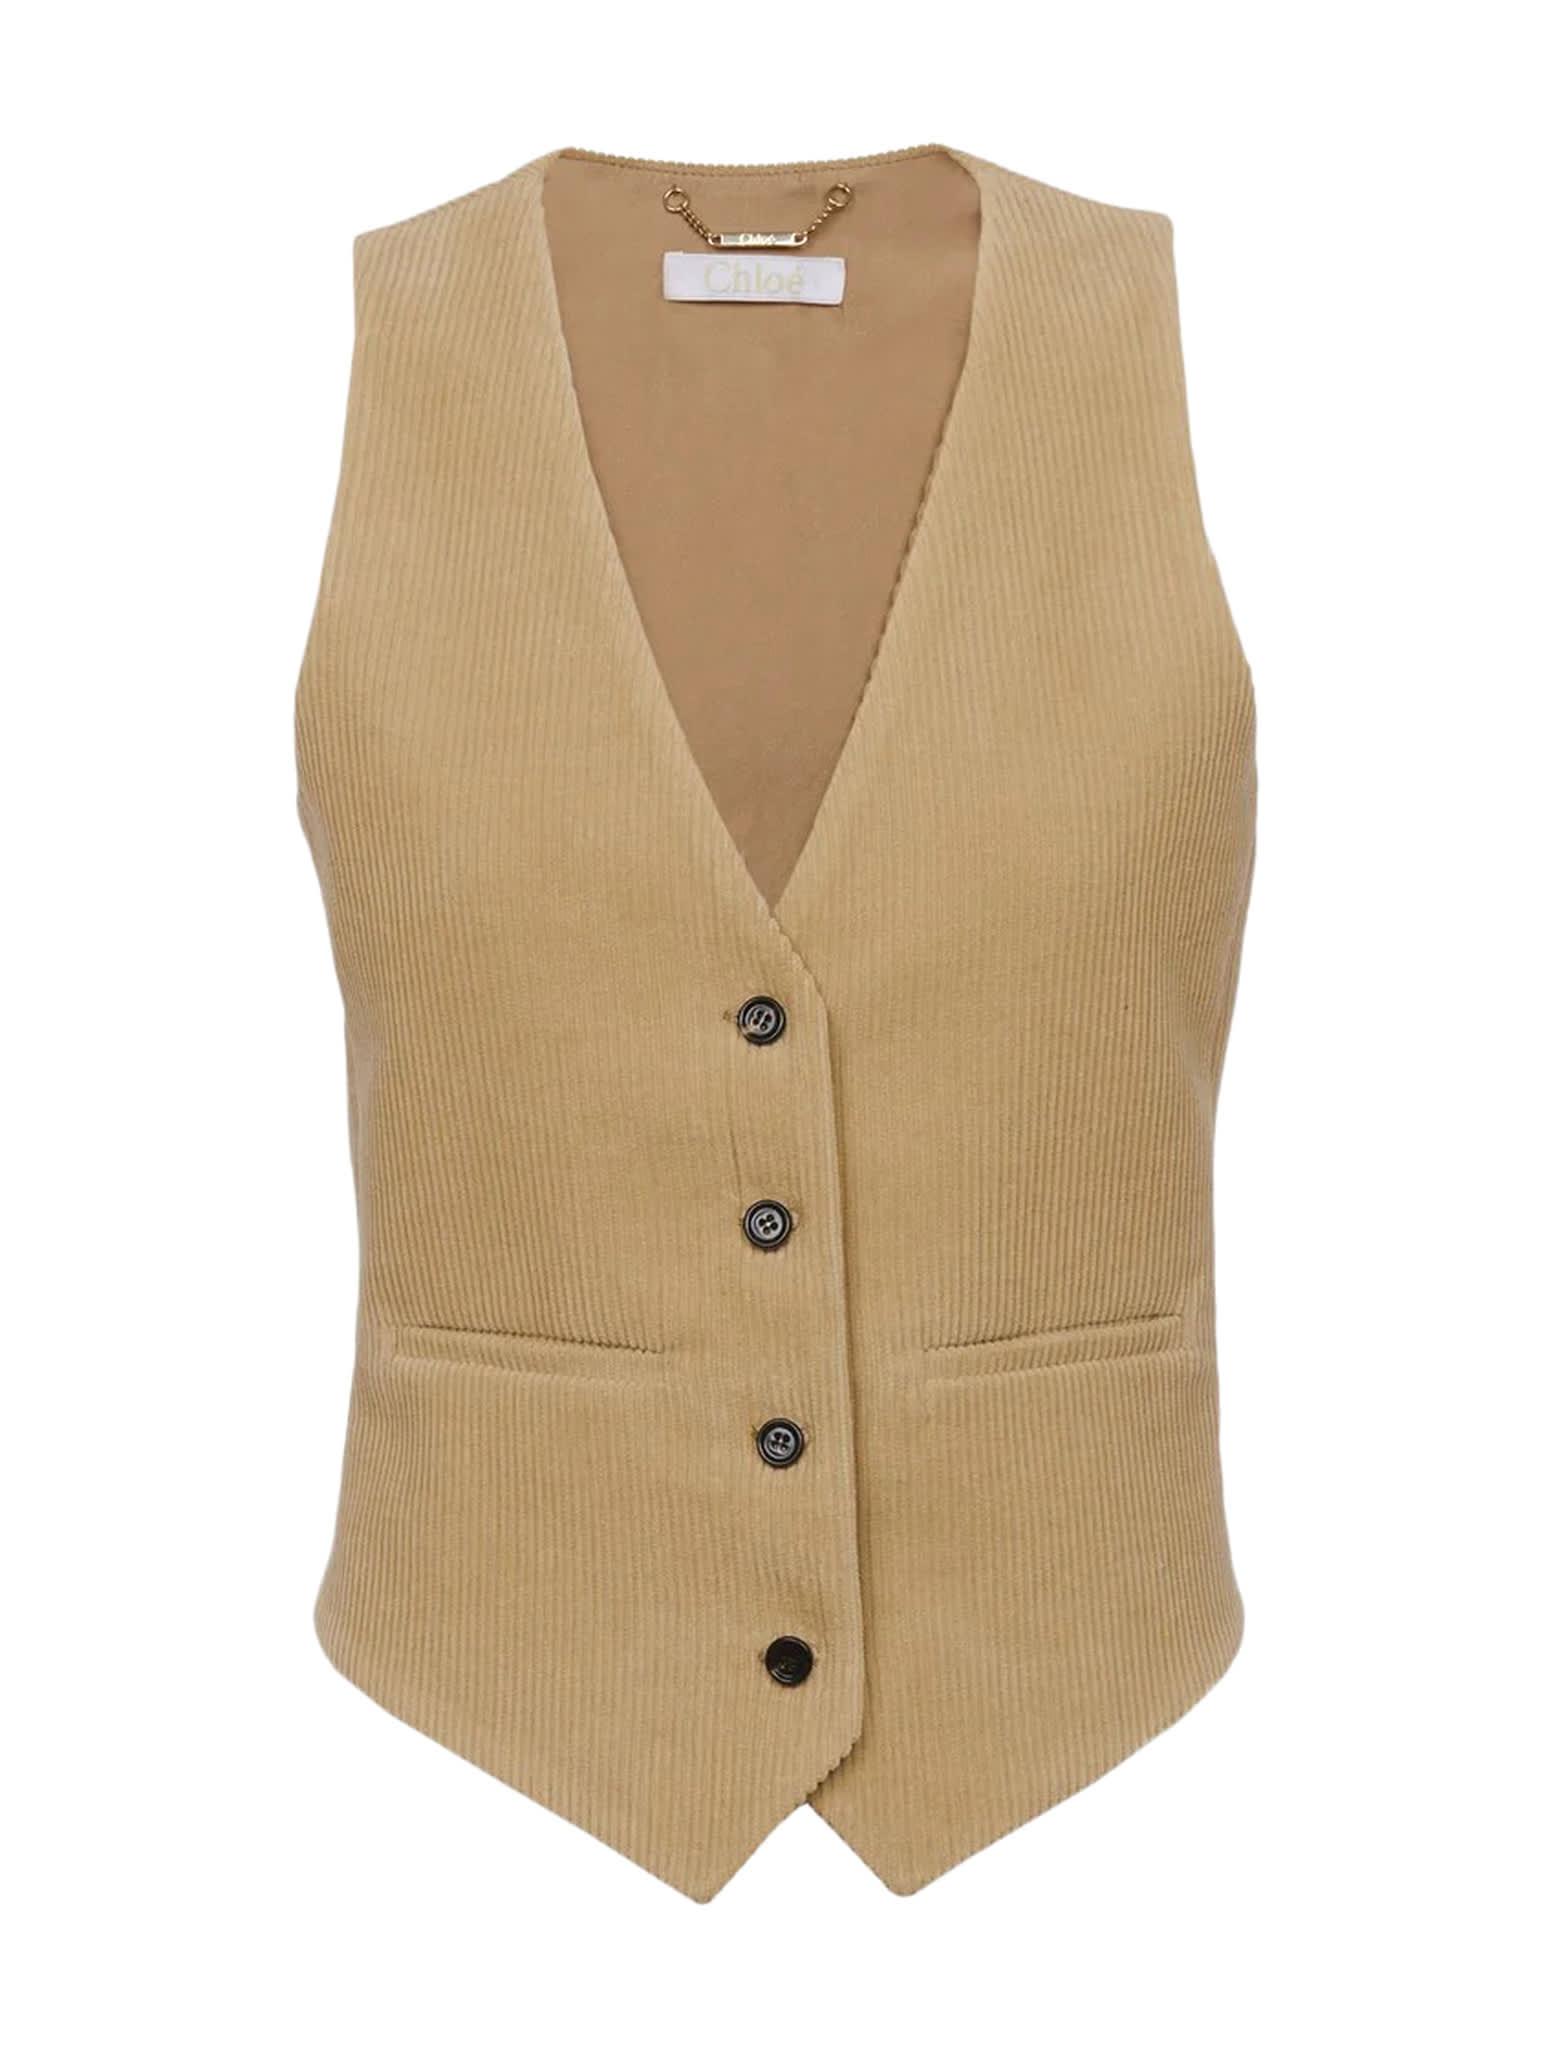 Chloé Gilet in Natural | Lyst